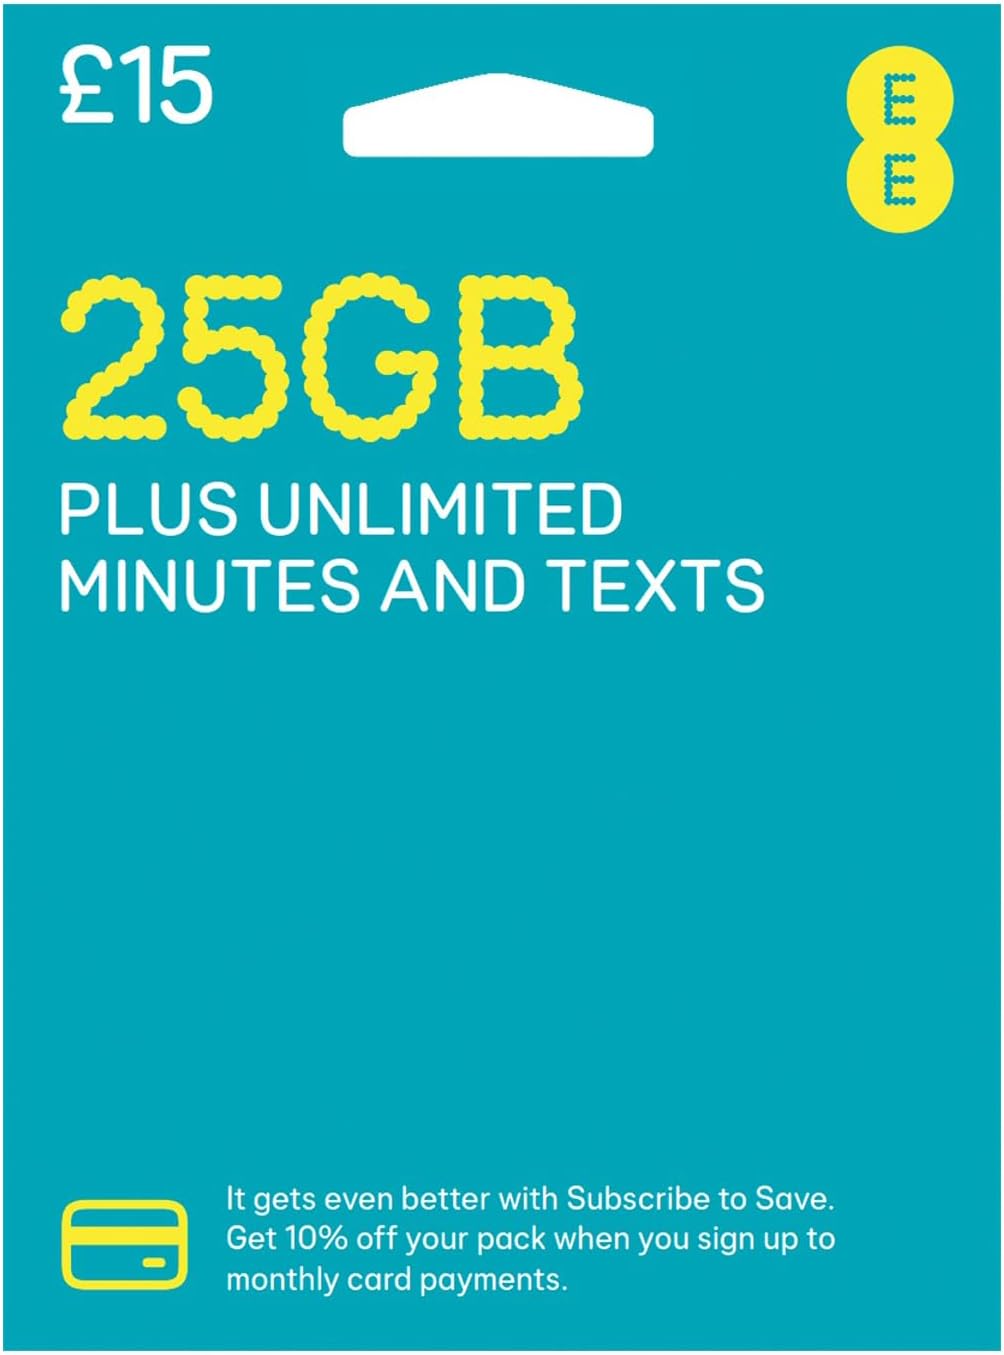 EE Sim Card Pay As You Go £15 Pack 25GB Data